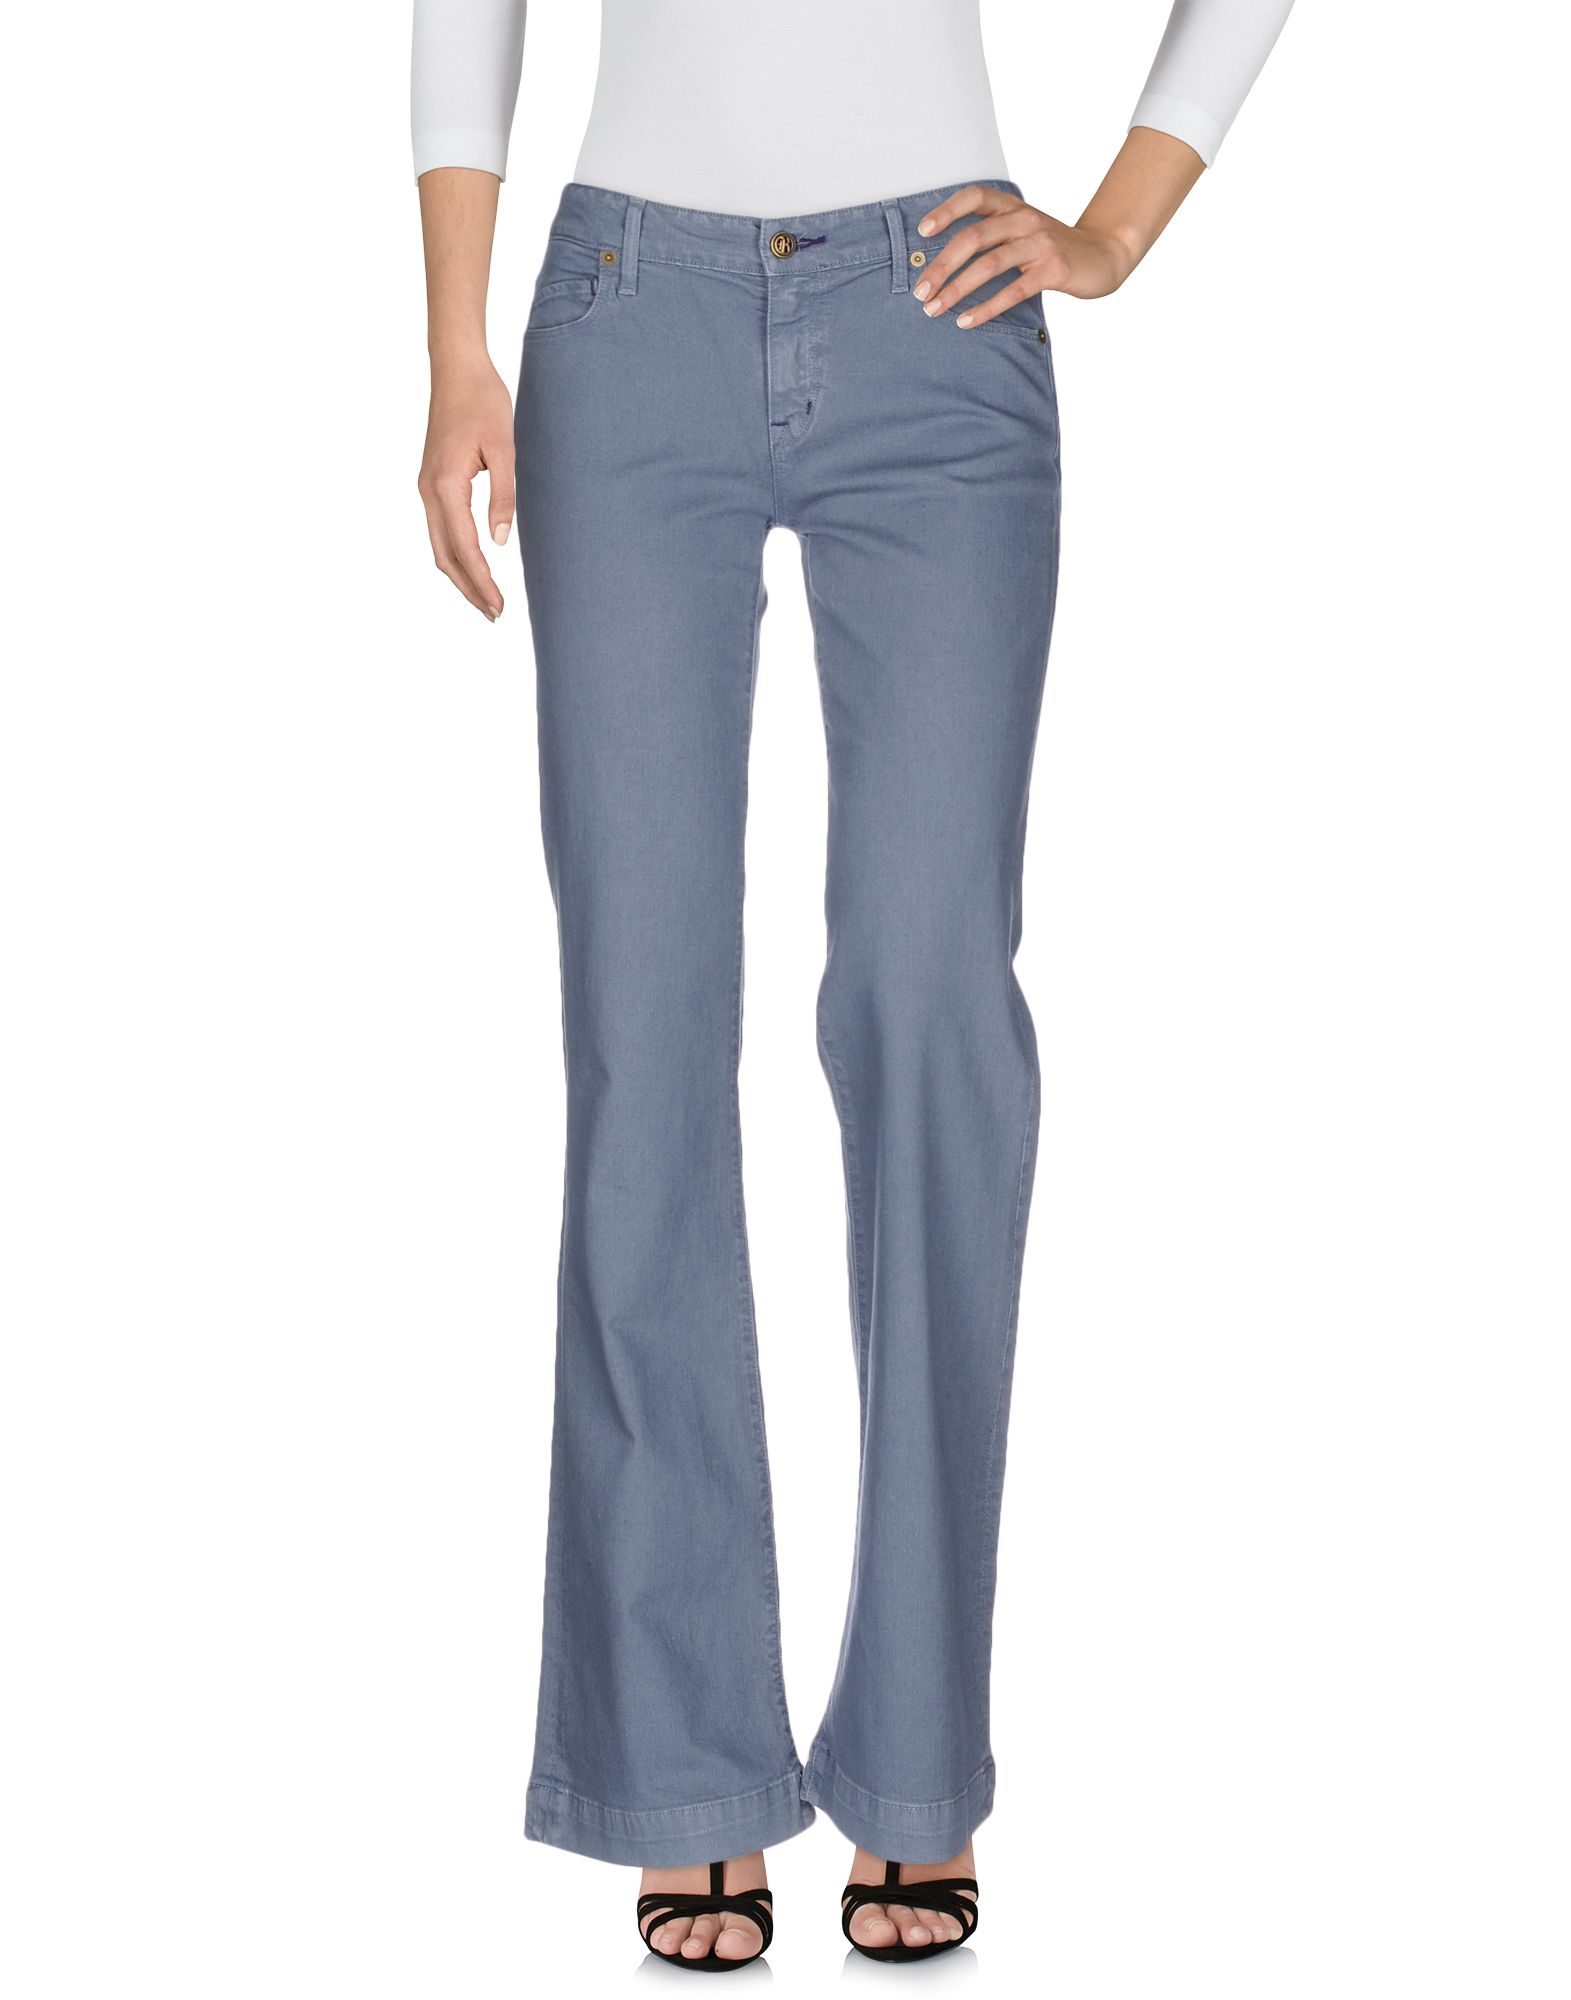 Rich and Skinny Women's Jeans | Jeans Hub